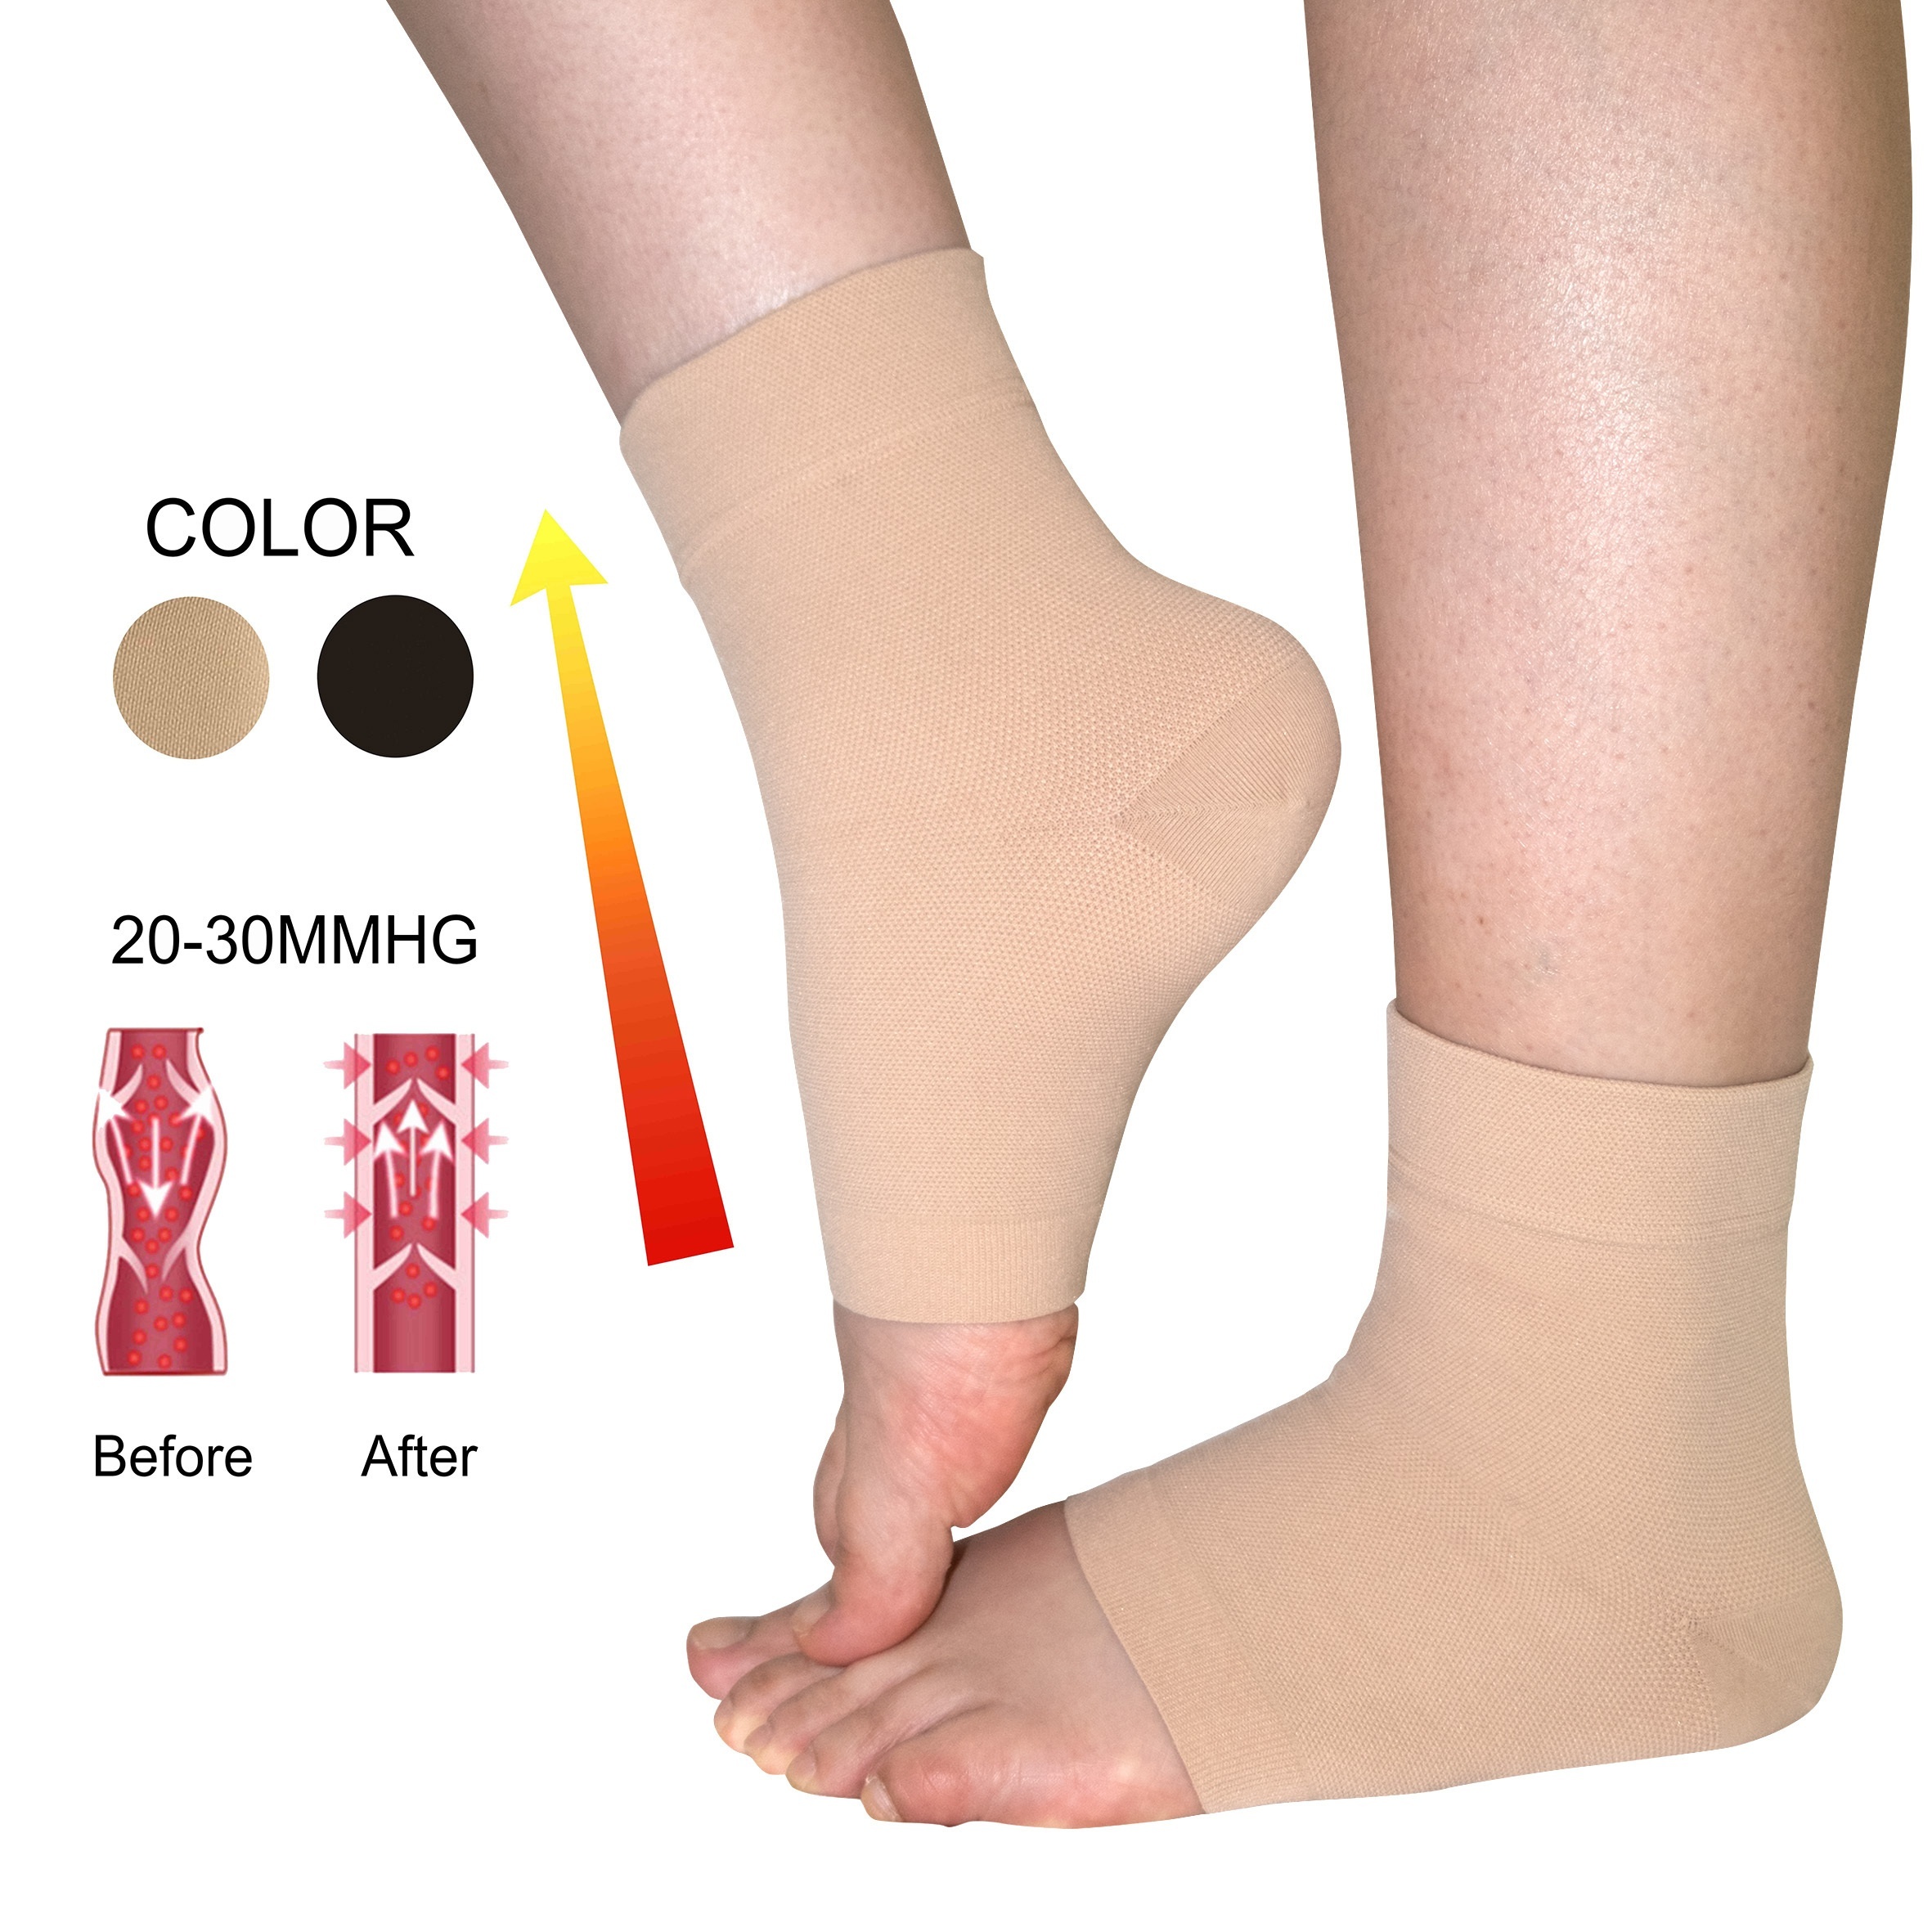 1Pair Copper Compression Recovery Foot Sleeves Men Women Plantar